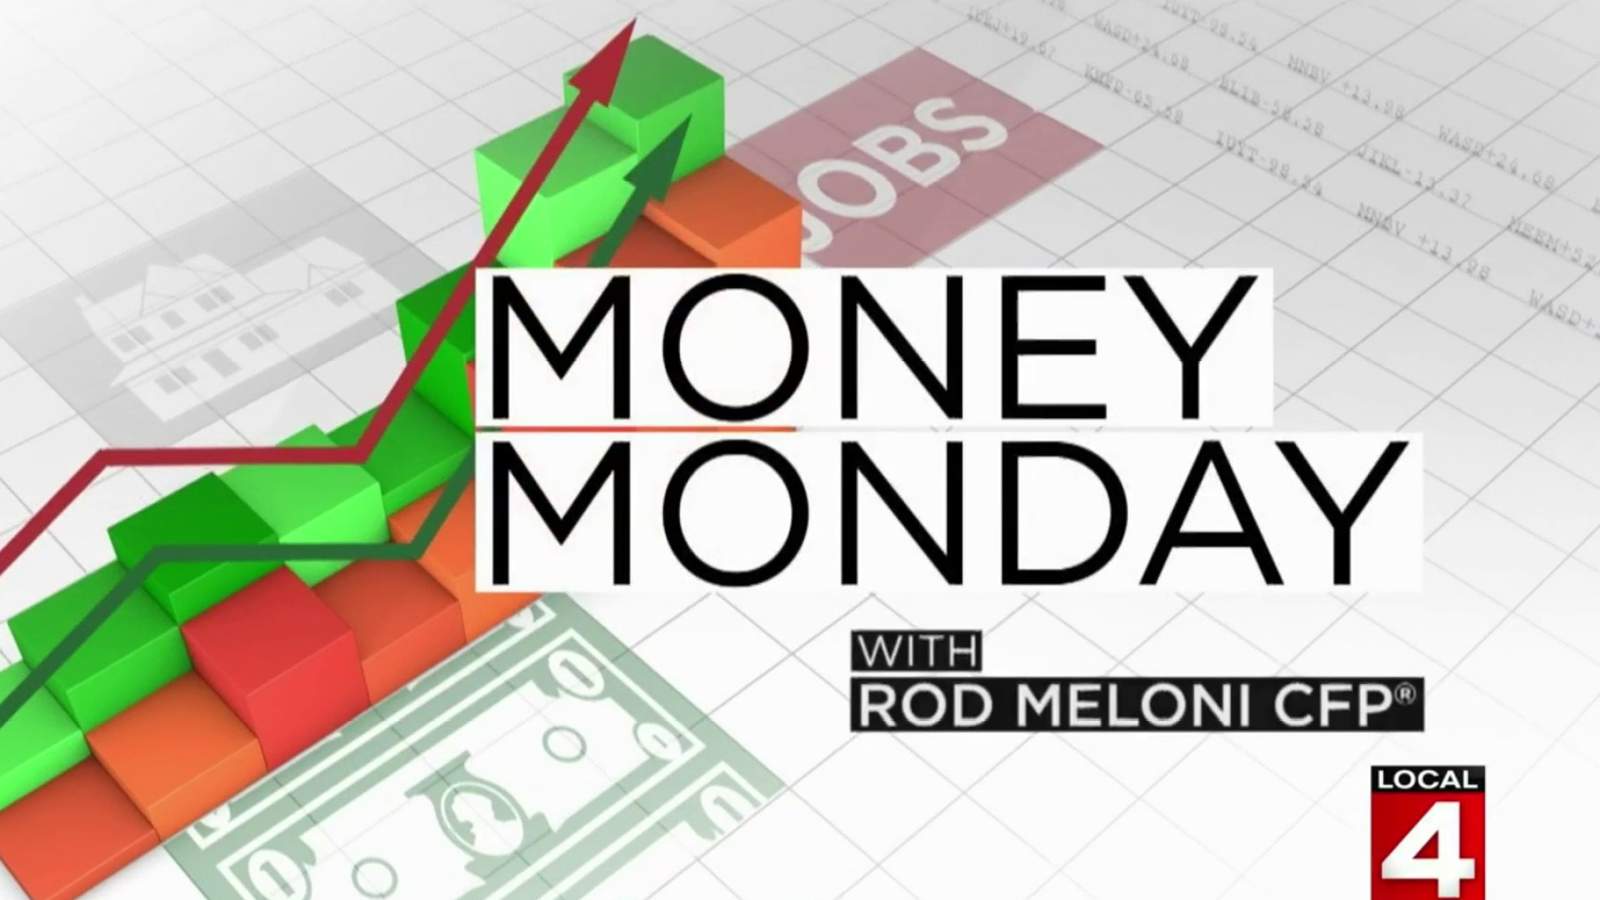 Money Monday: Michigan Financial Wellness Month is upon us